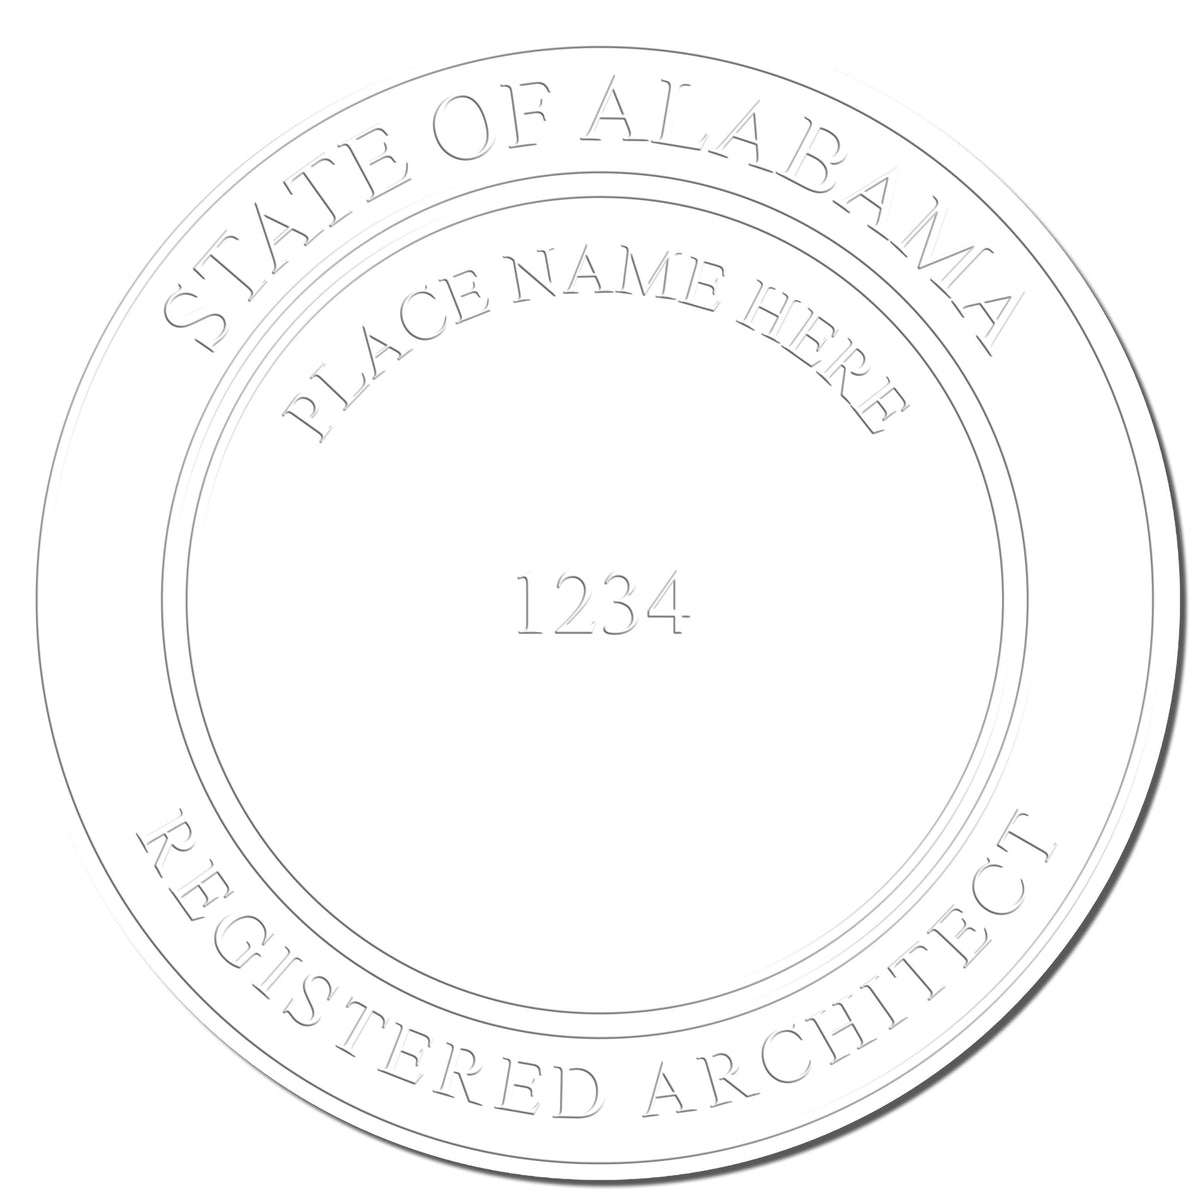 A photograph of the Alabama Desk Architect Embossing Seal stamp impression reveals a vivid, professional image of the on paper.